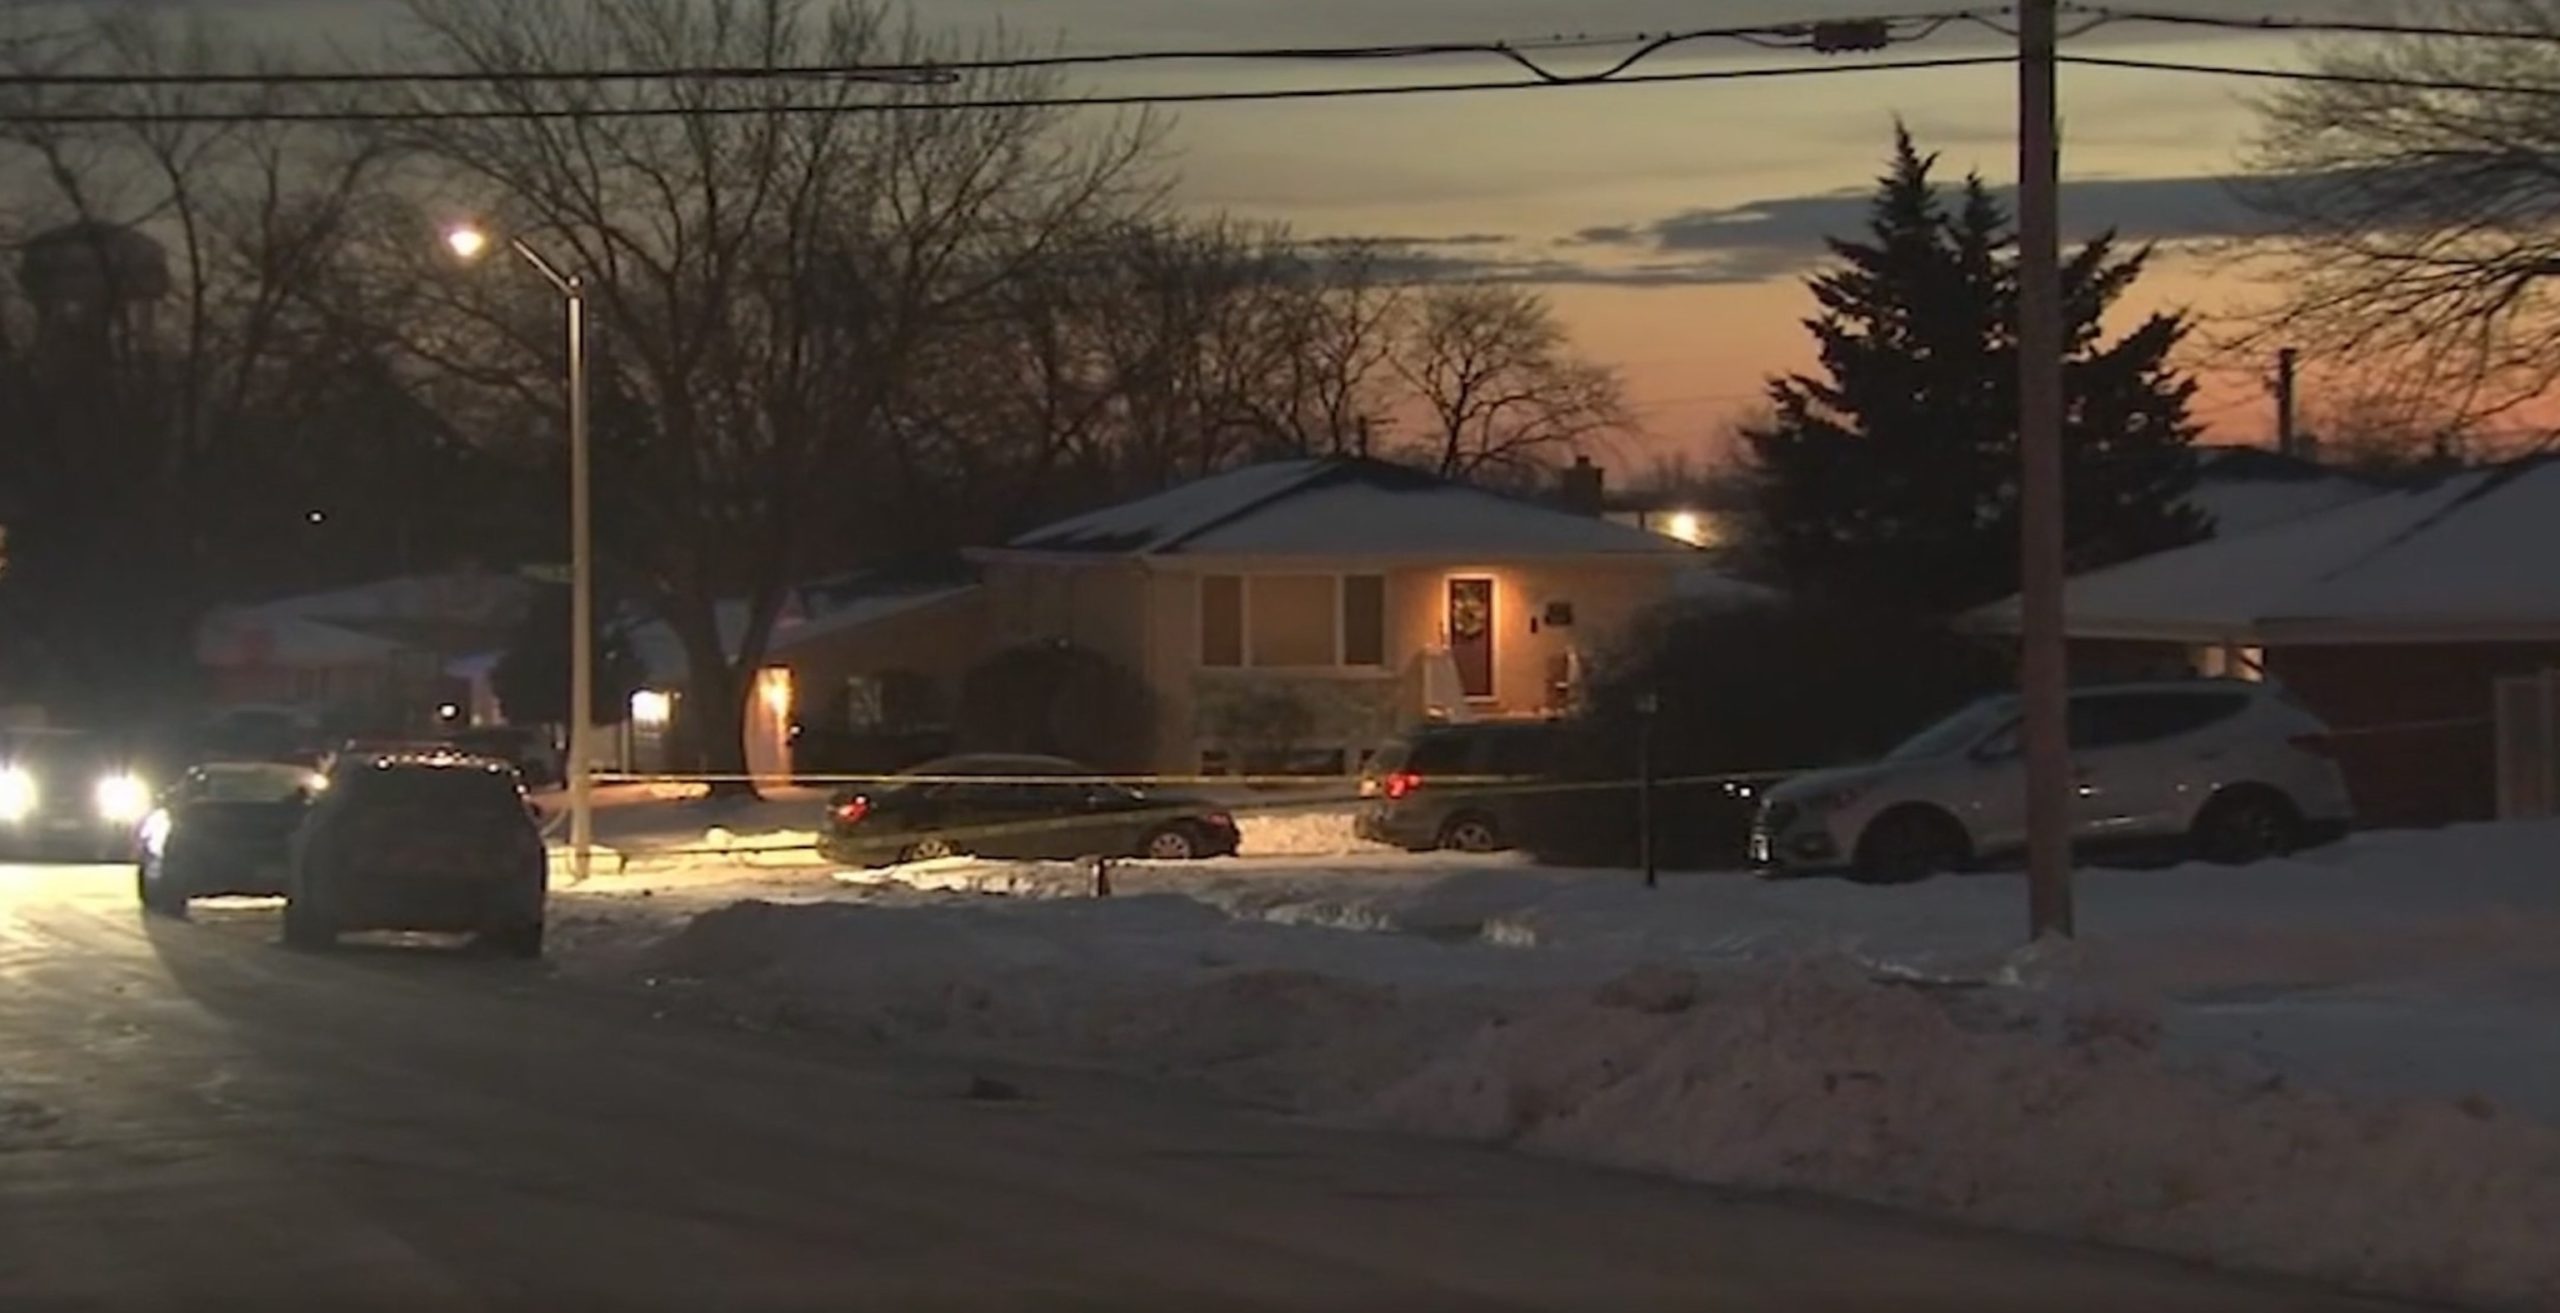 Tragic Domestic Incident Claims Lives of Mother and Three Daughters in Suburban Illinois Home